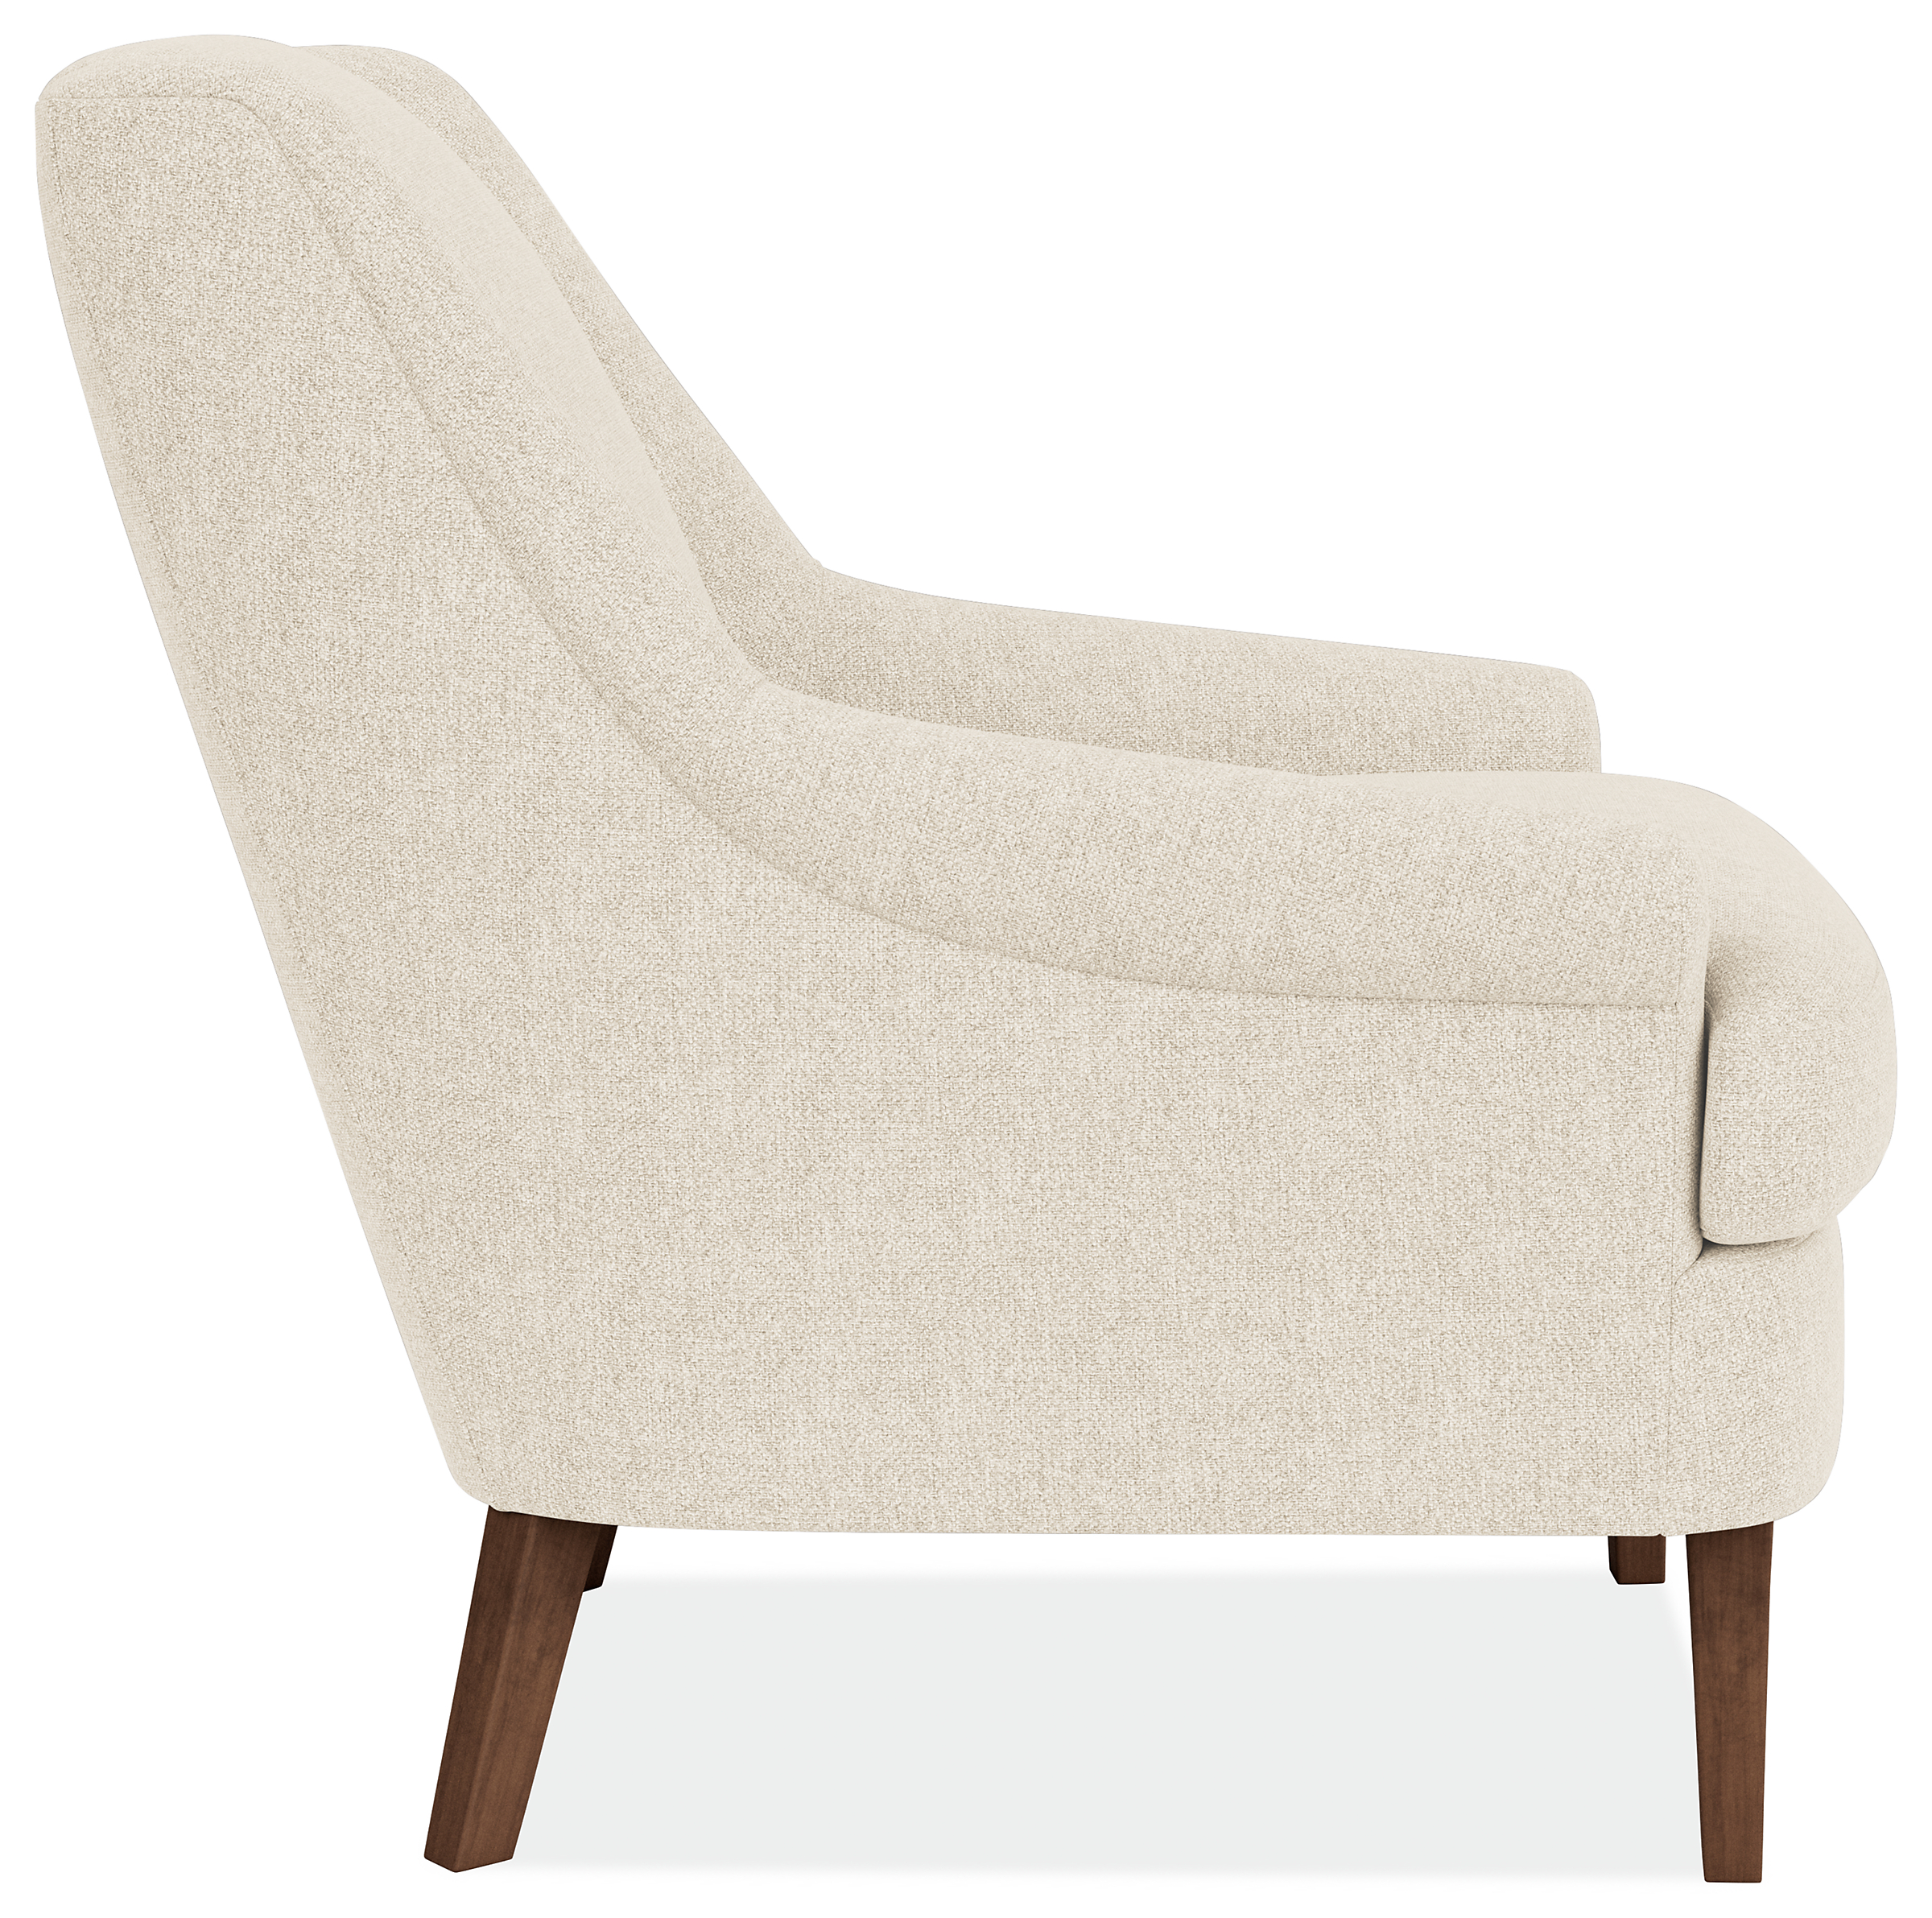 side view of Louise Chair in Tepic Ivory and Mocha.